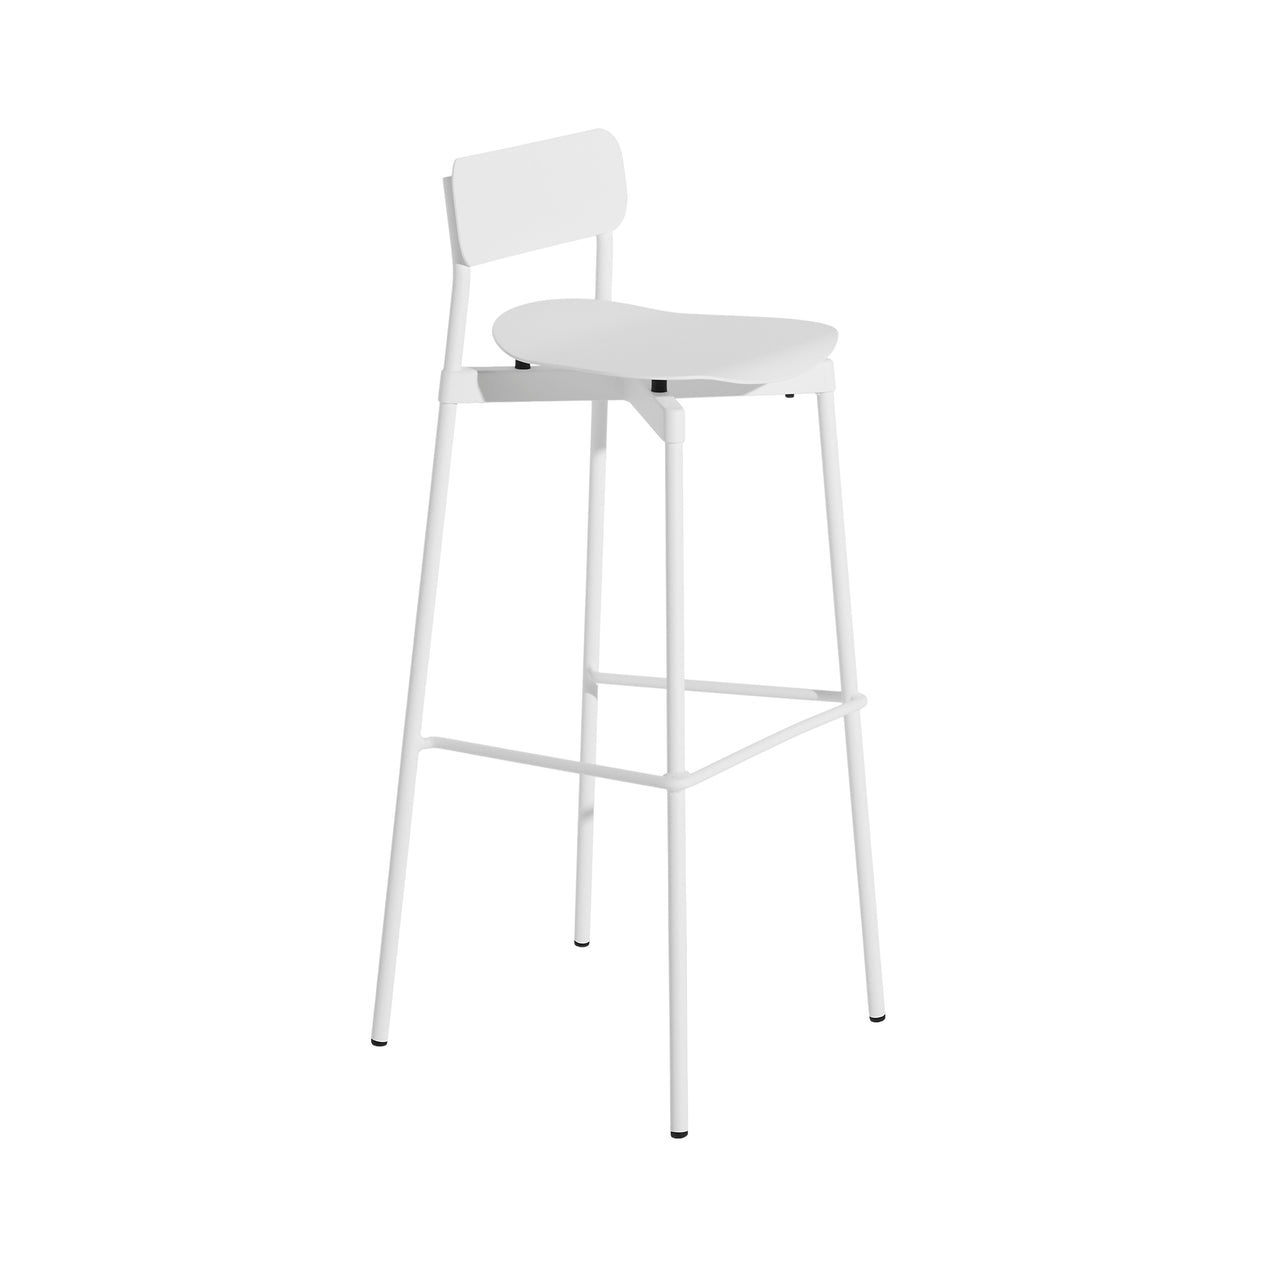  Fromme Stacking Bar + Counter Stool: Bar + White